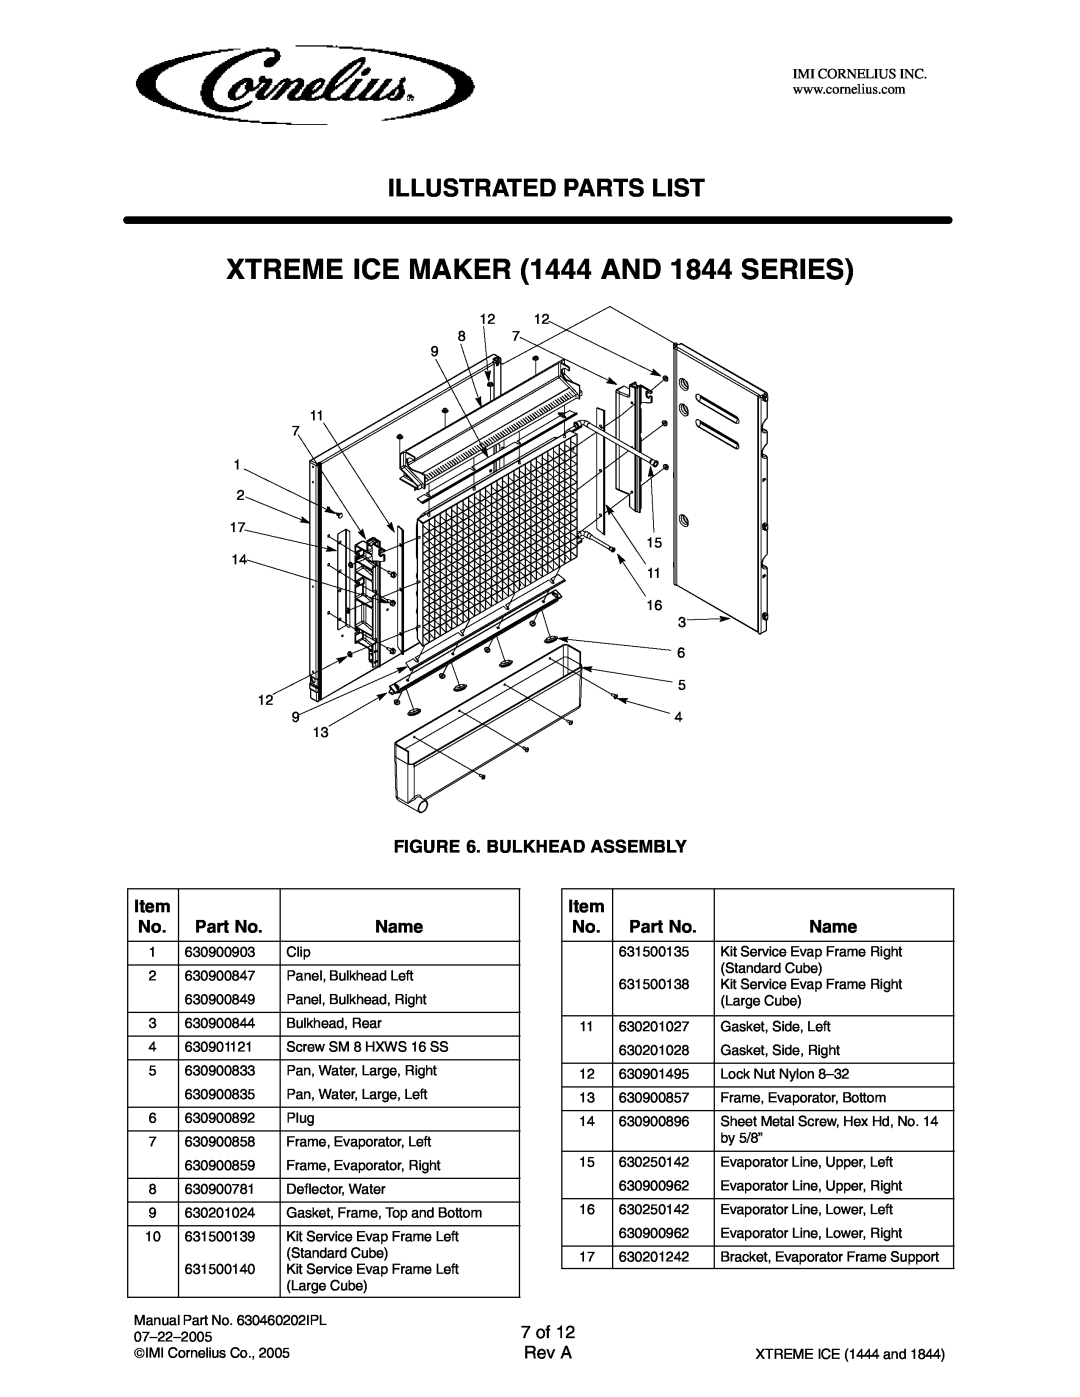 Cornelius 631818003 Bulkhead Assembly, 7 of, Kit Service Evap Frame Right, XTREME ICE MAKER 1444 AND 1844 SERIES, Name 